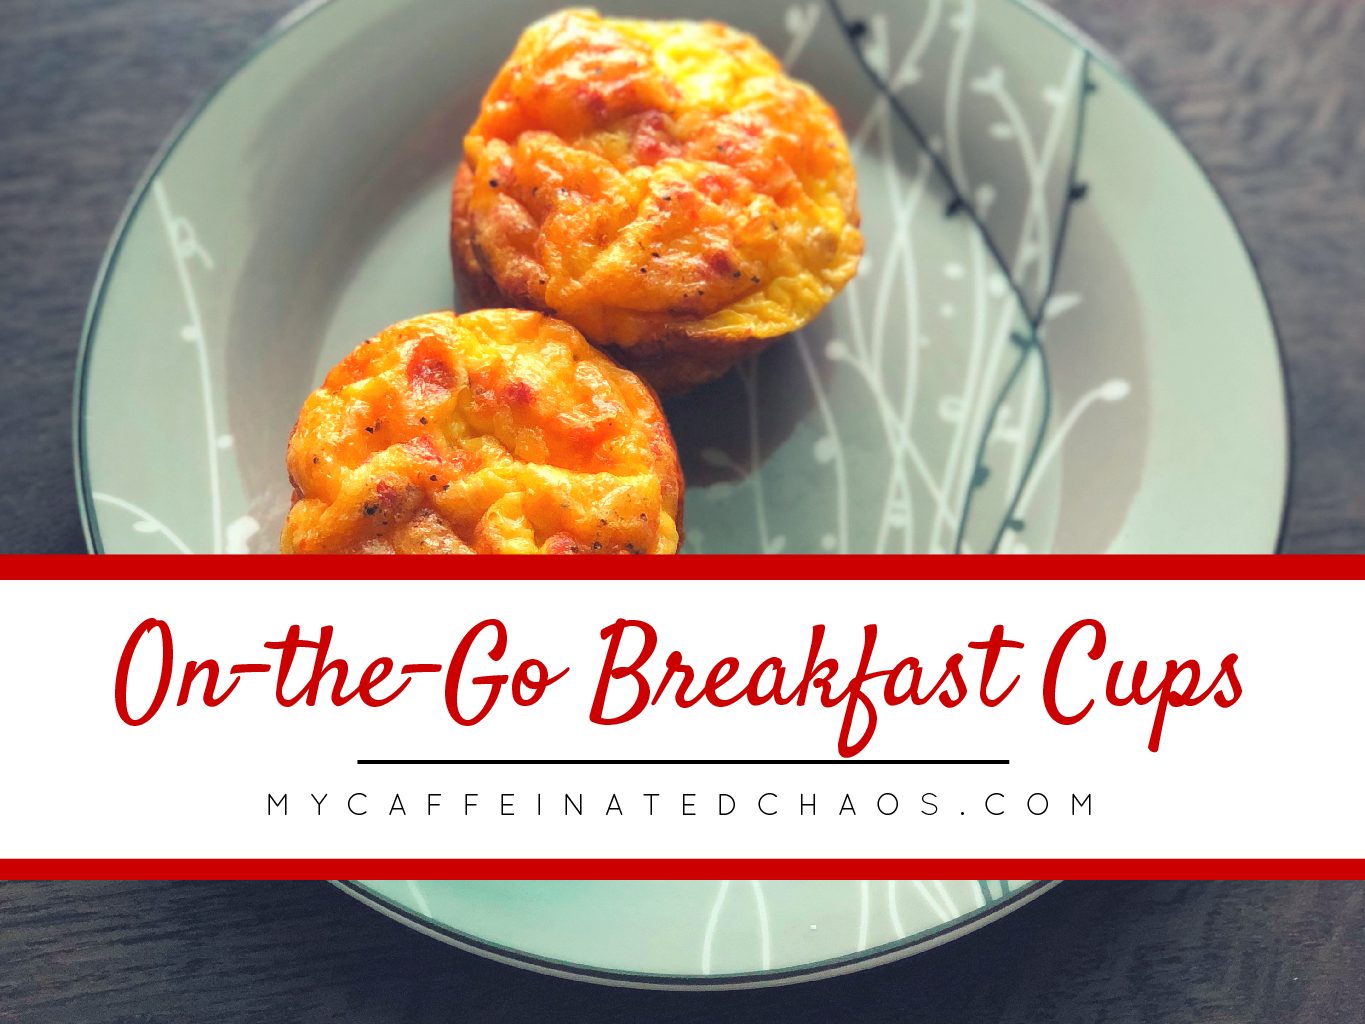 On-the-Go Breakfast Cups